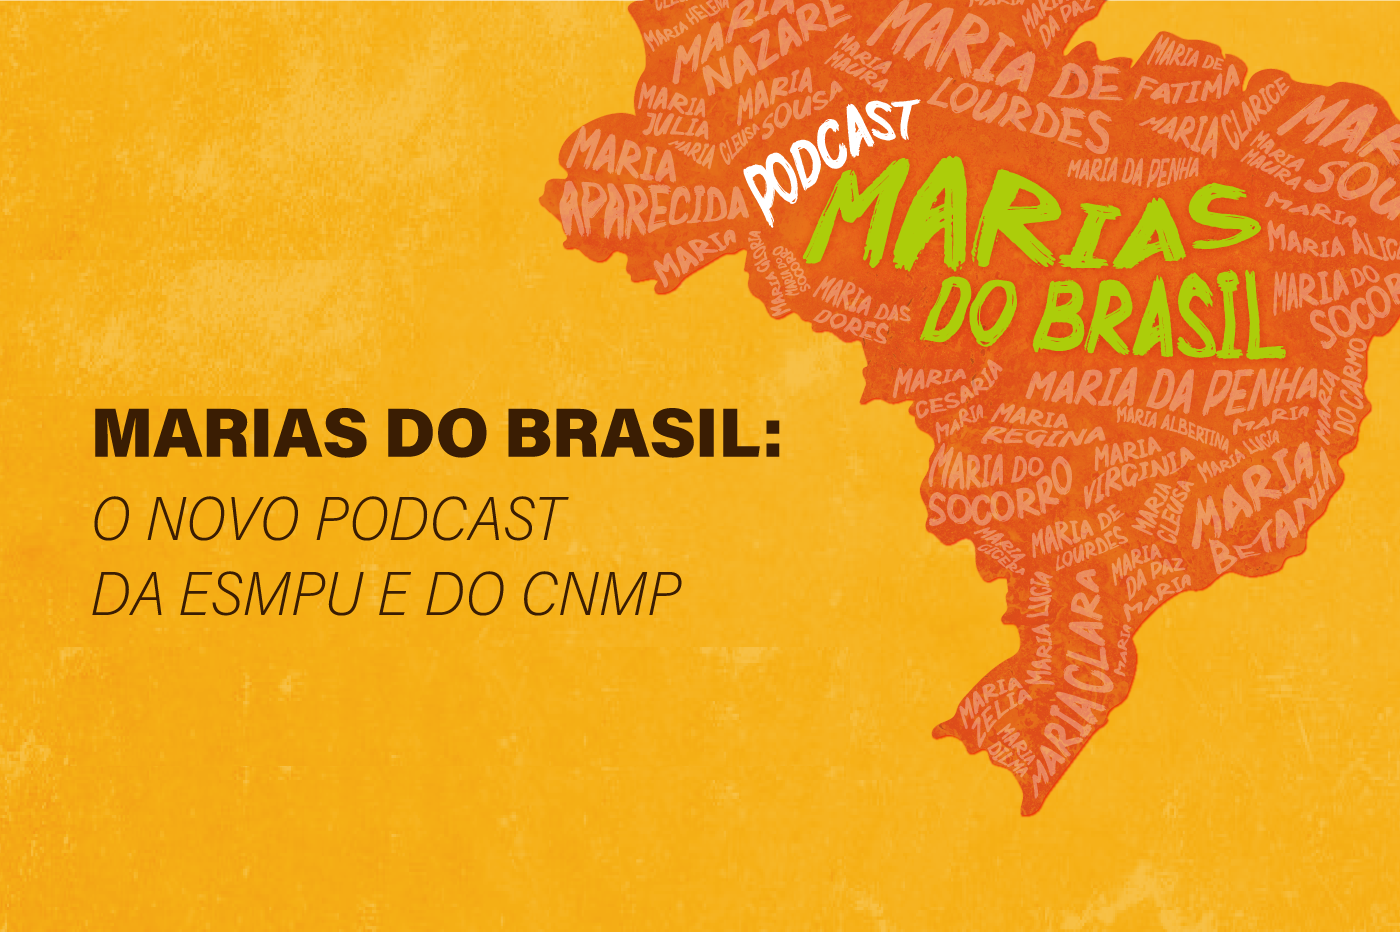 banner_noticia_podcast_marias_brasil2.png - 1,16 MB